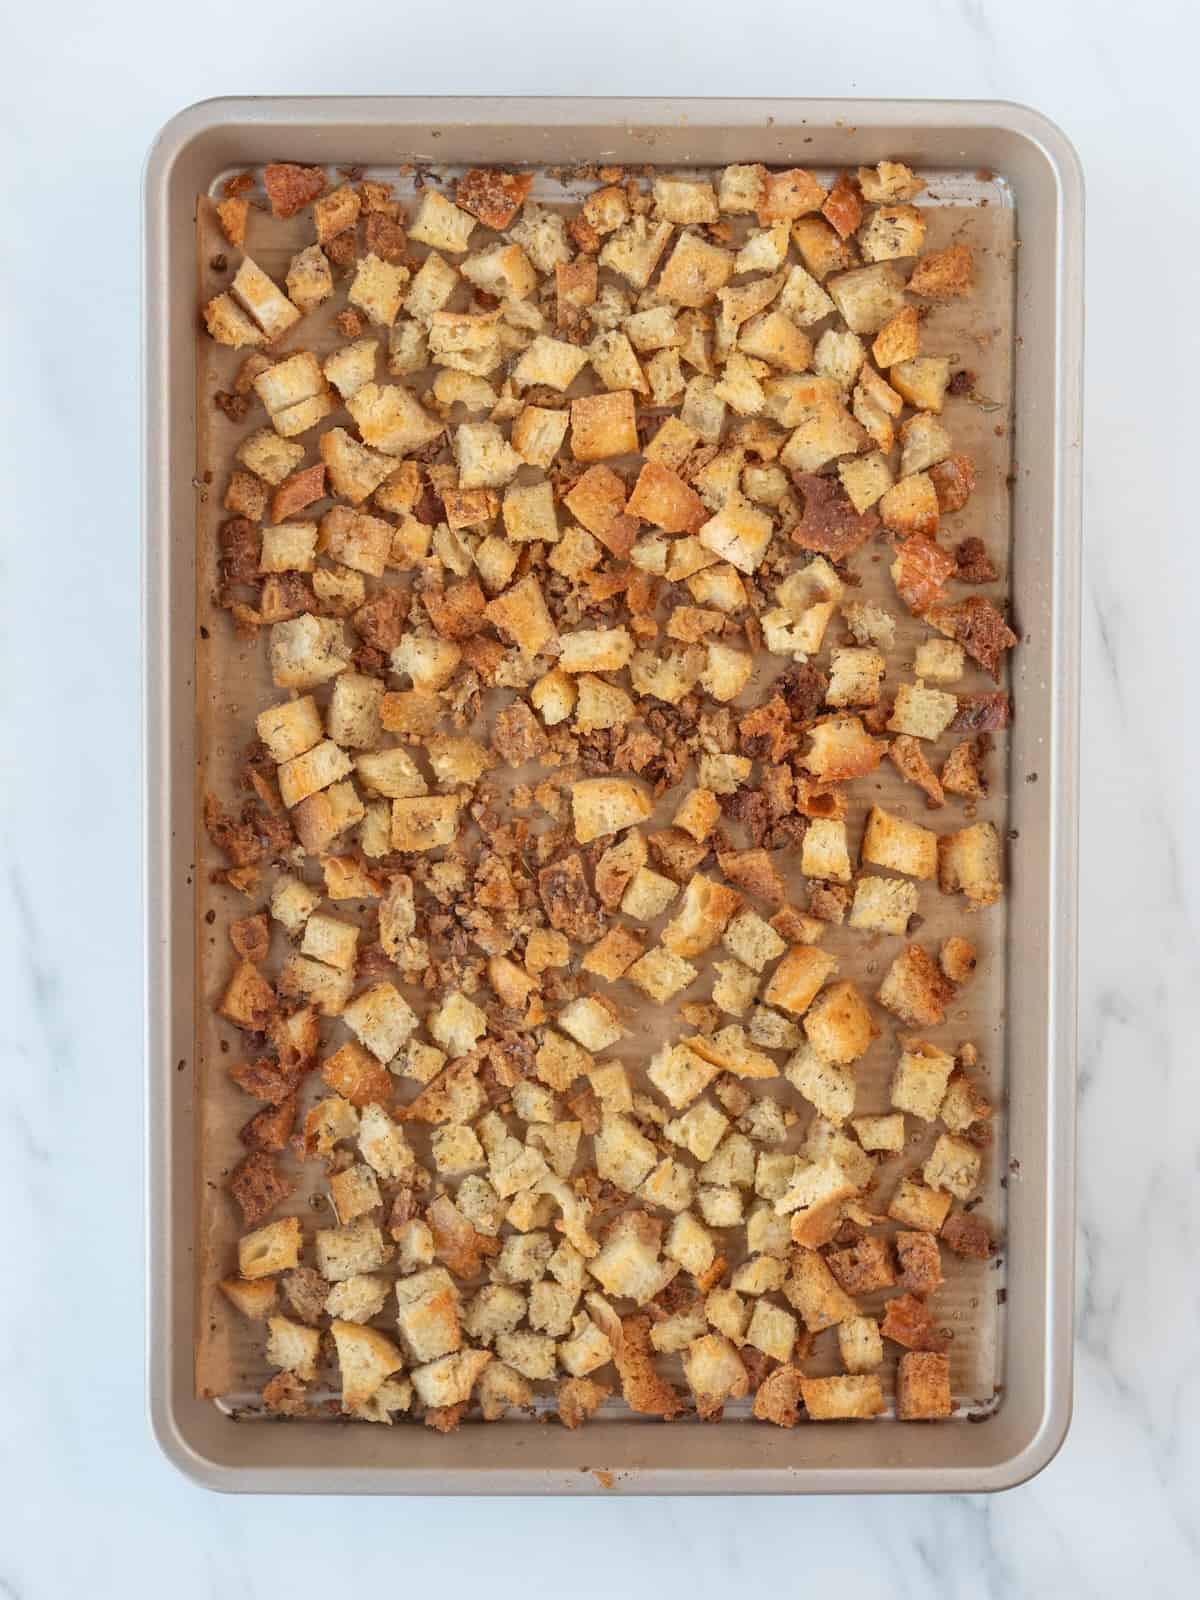 A rectangular parchment paper-lined baking sheet of cubed pieces of bread baked in the oven to make croutons.